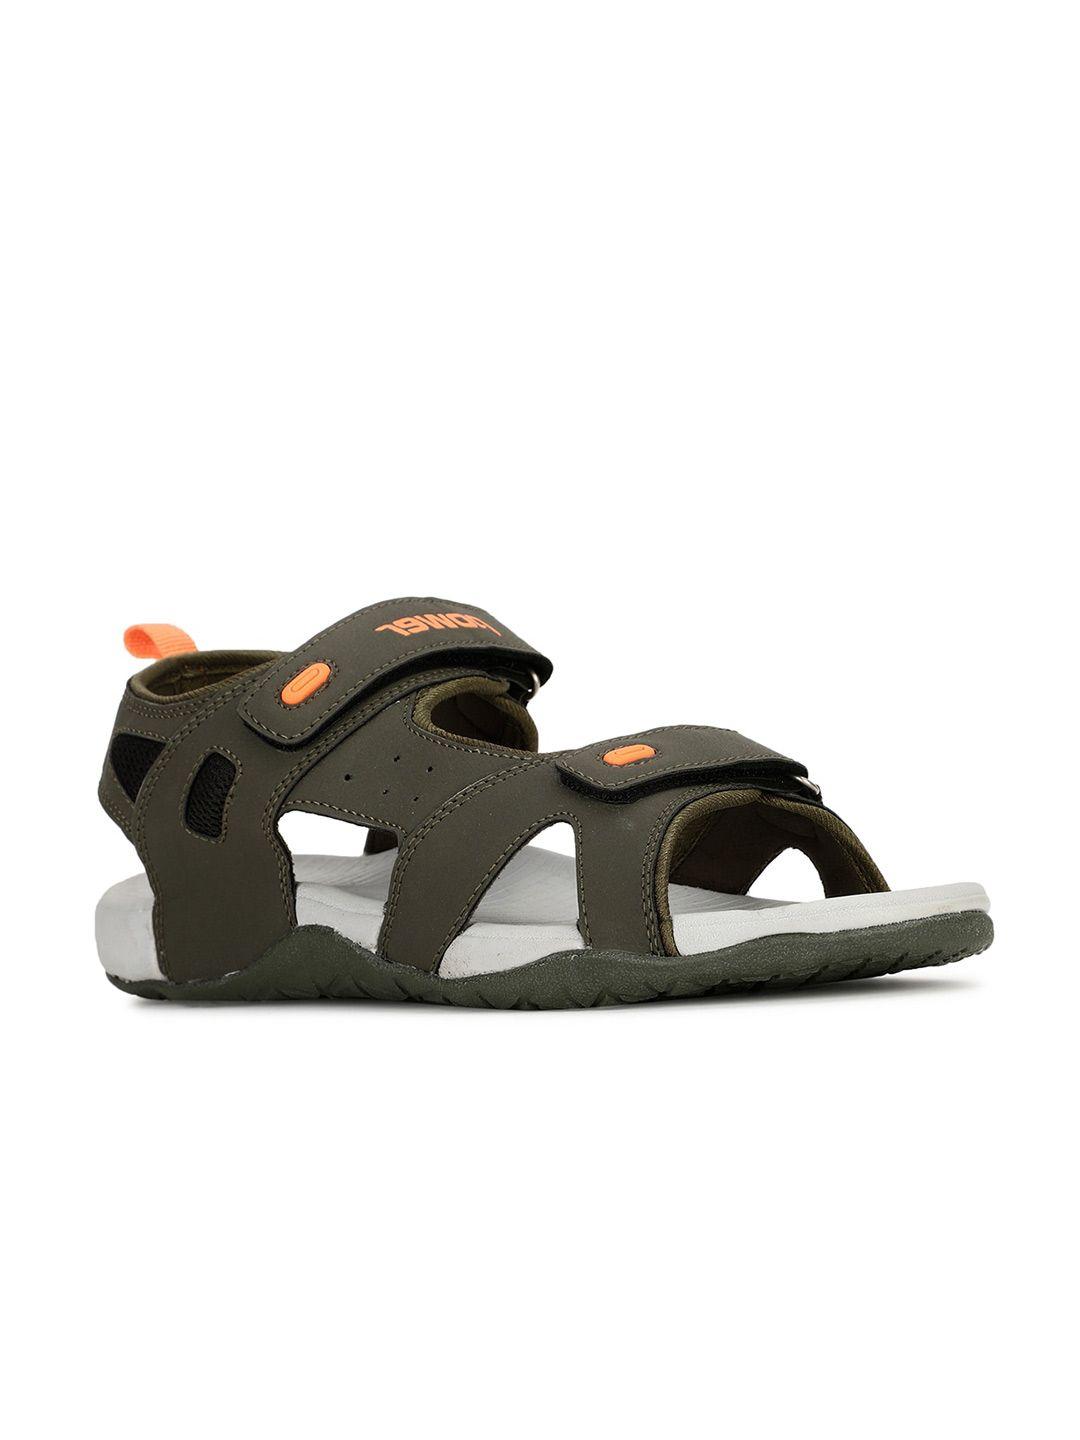 power-men-abbey-sports-sandals-with-velcro-closure